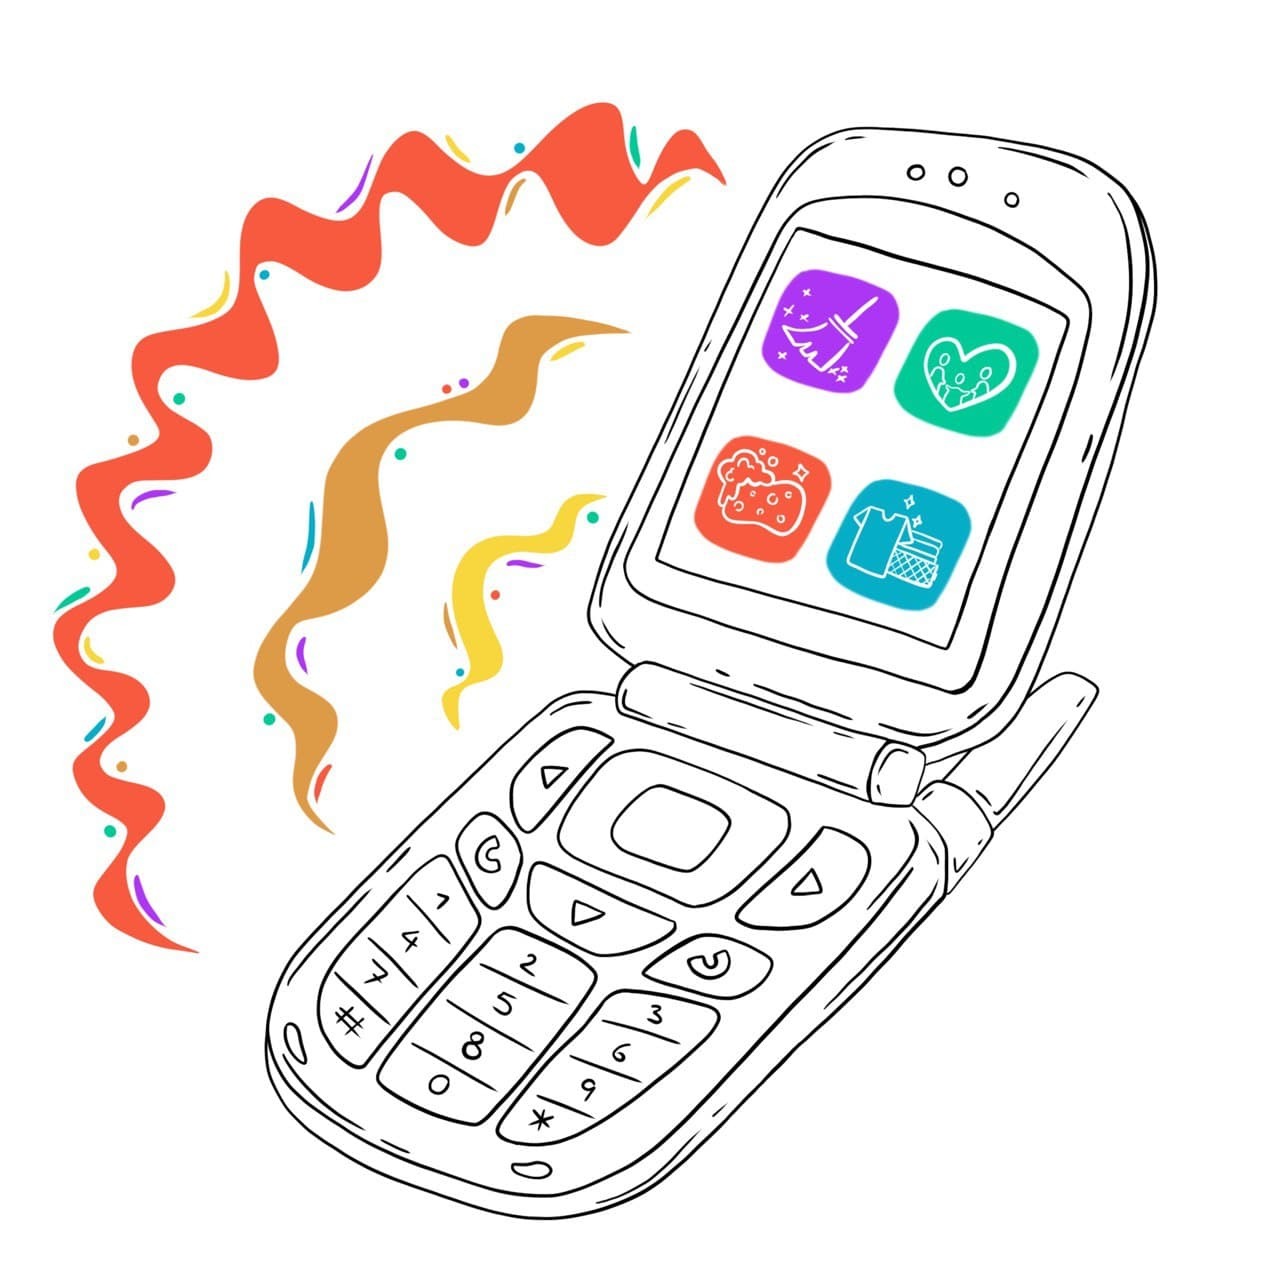 Drawing of an old-fashioned flip phone, with symbols on the screen suggesting health, household chores and family